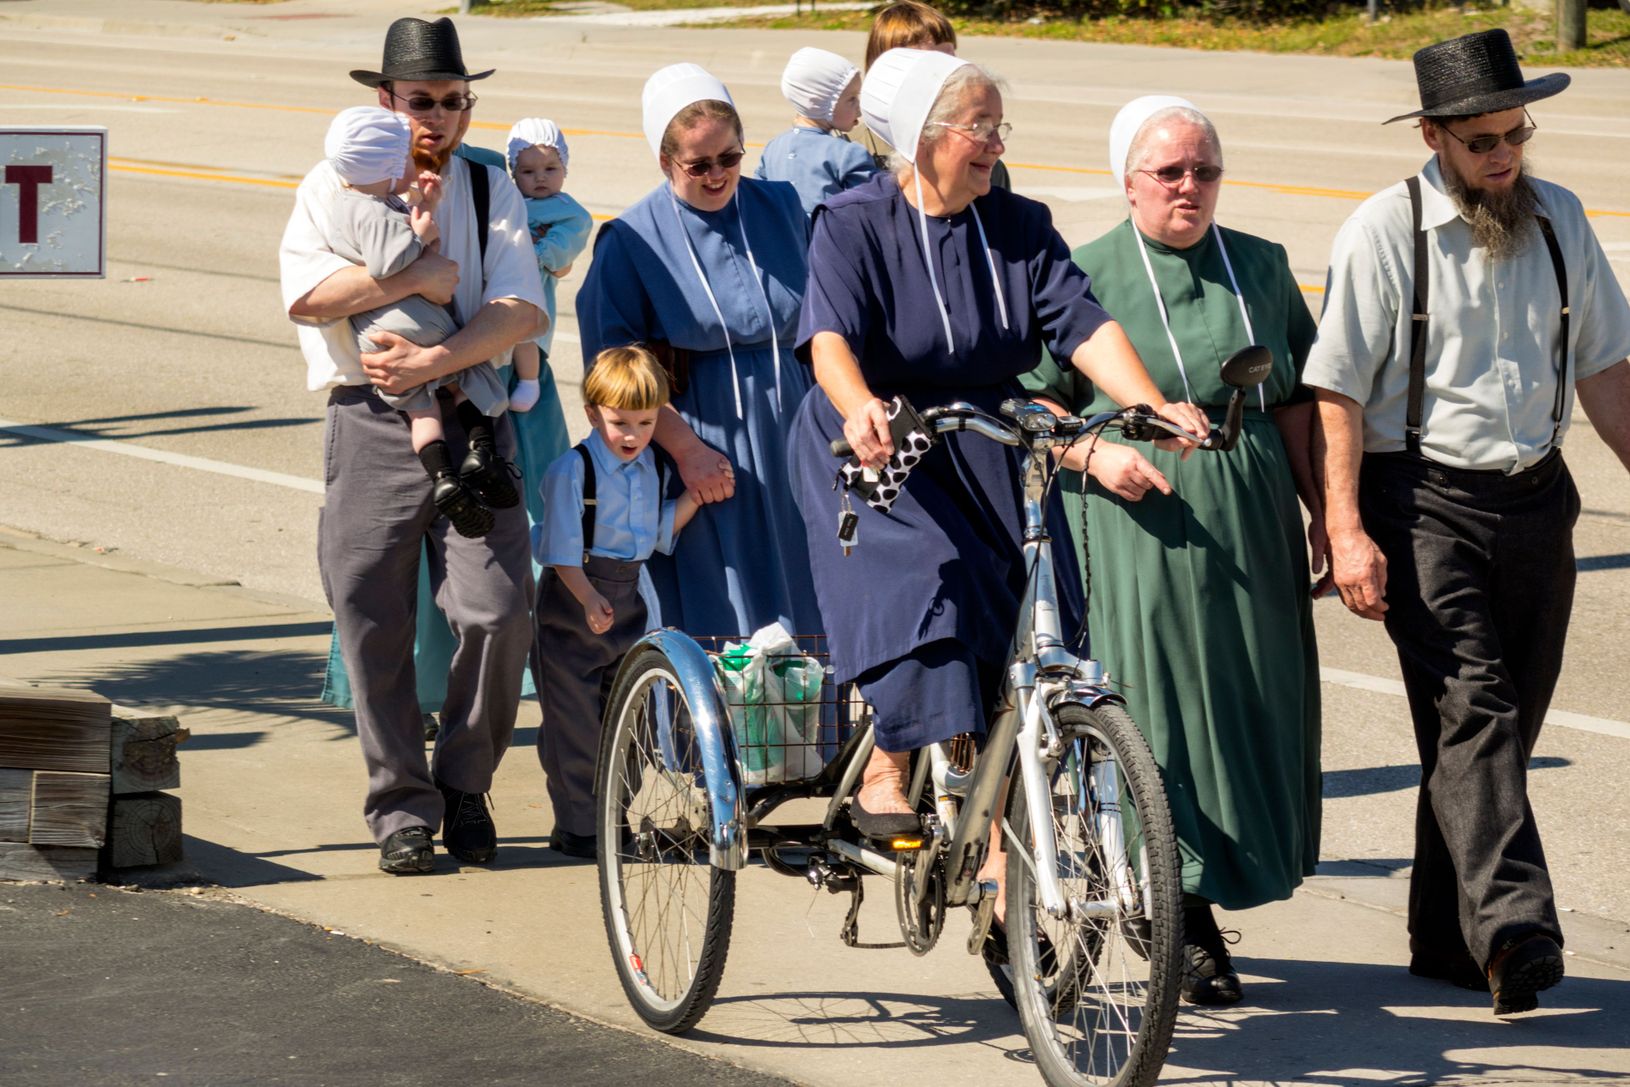 Amish Life: 10 Facts That Will Send You On A Rumspringa